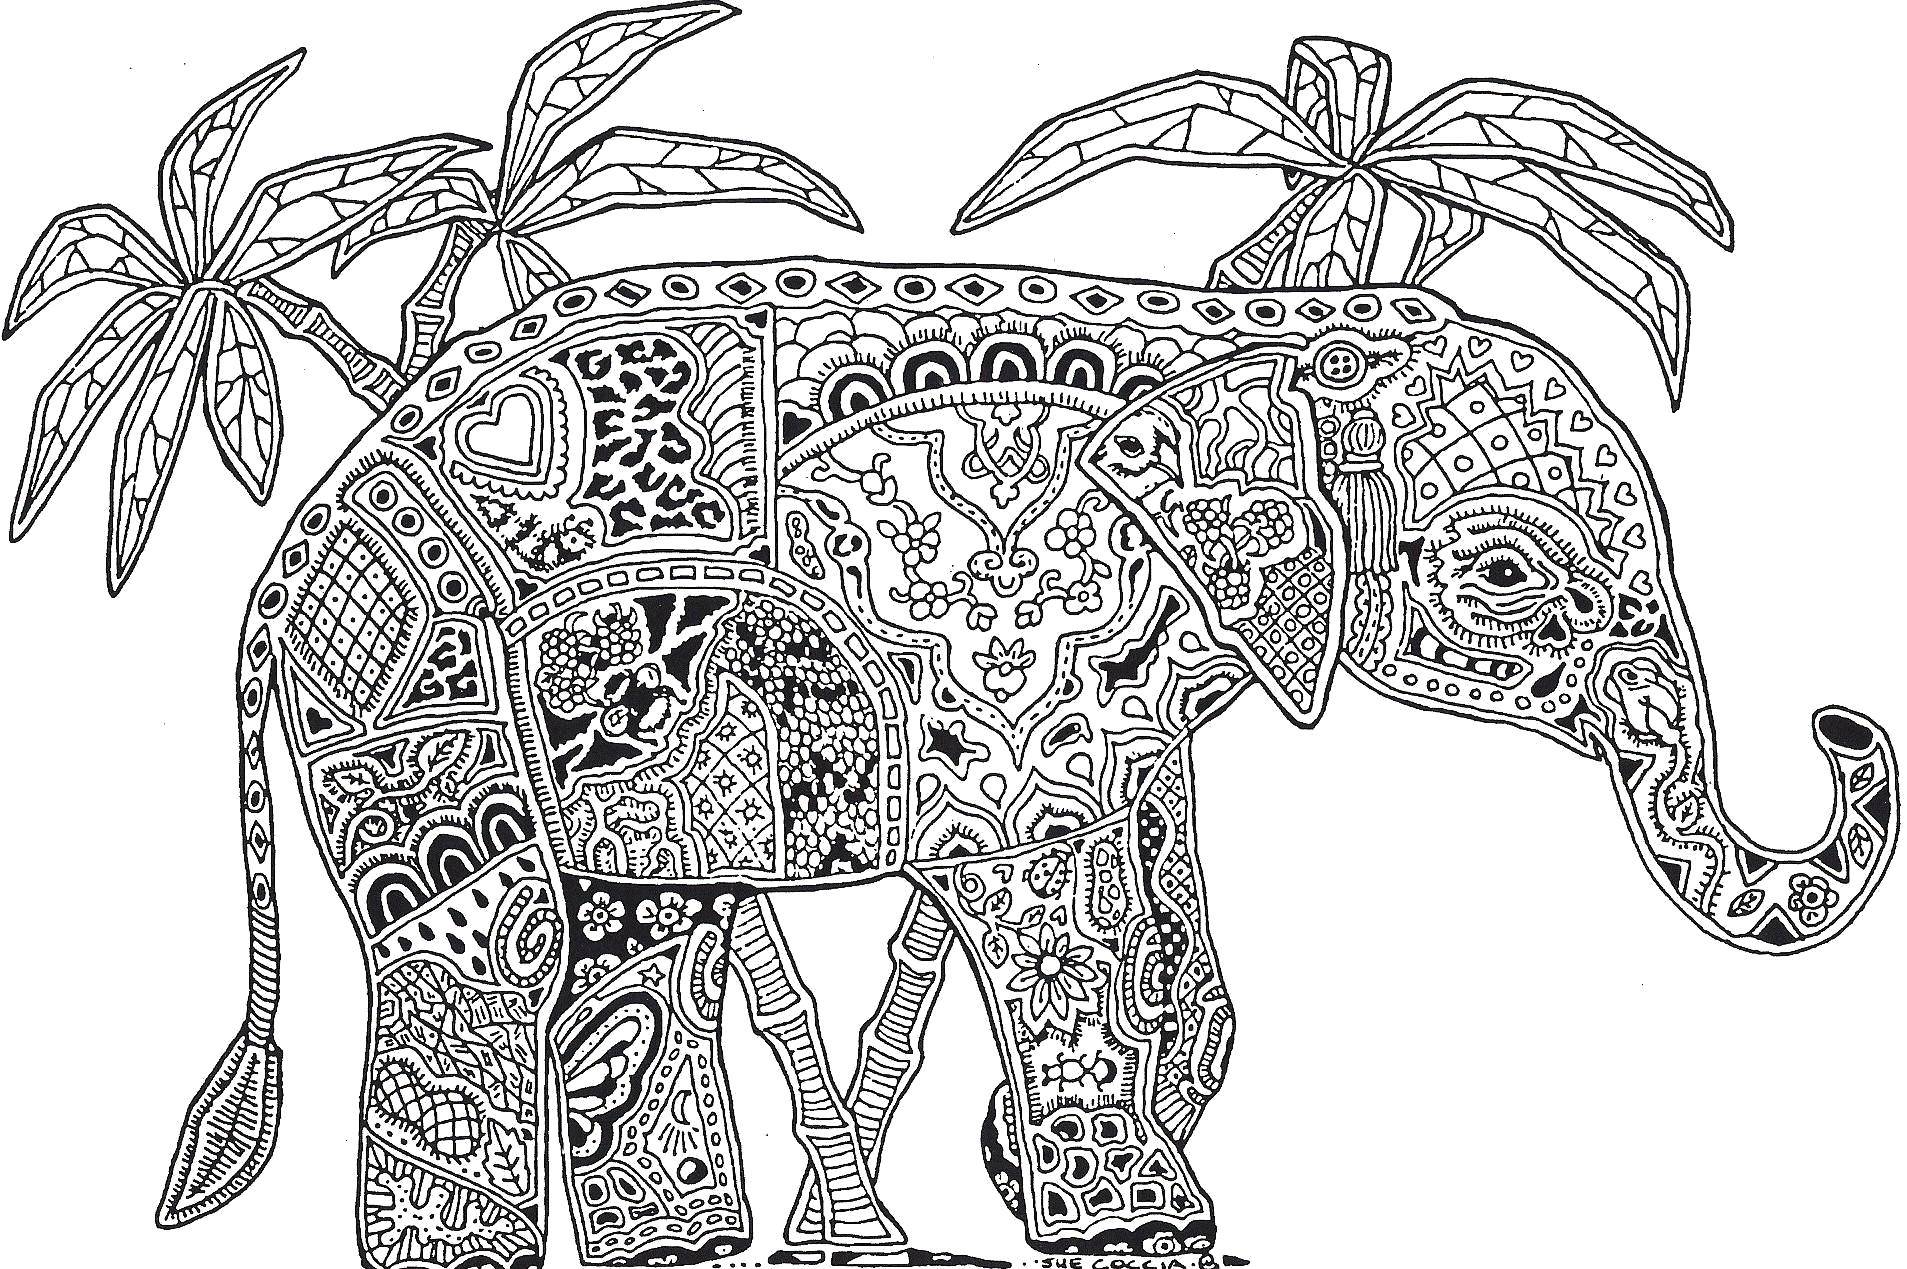 Coloring The elephant is covered with uzorchikami. Category coloring pages for teenagers. Tags:  Patterns, animals.